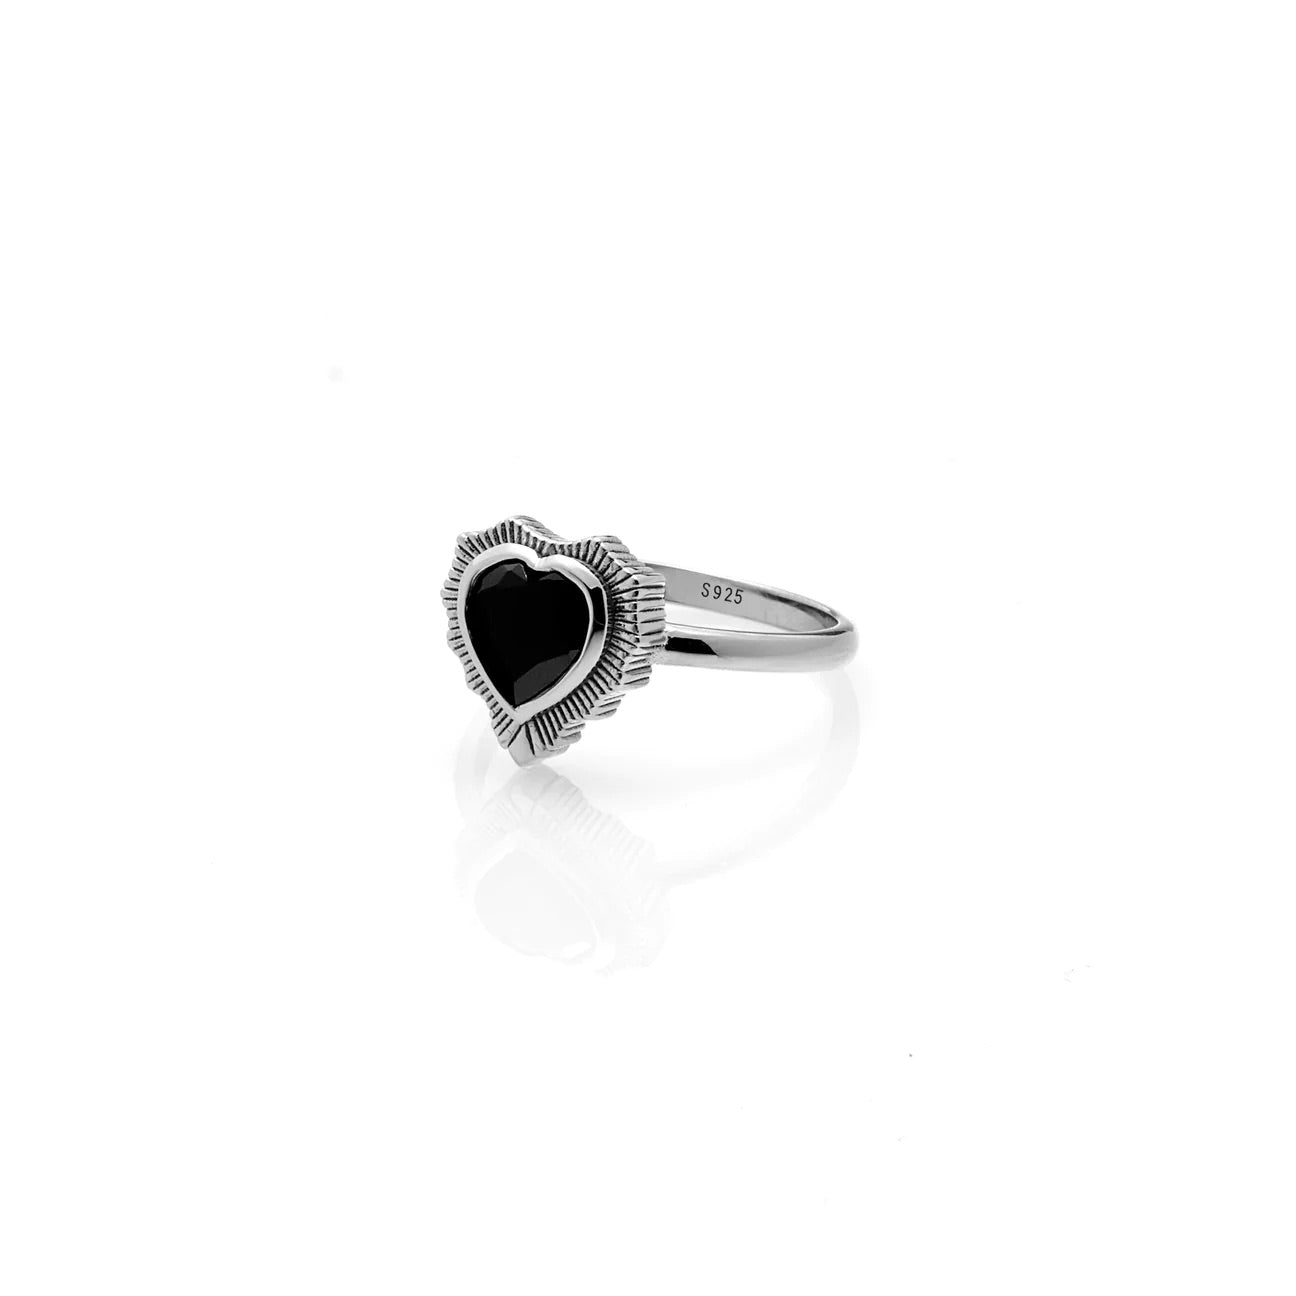 Amour Ring By Silk & Steel - Black/Silver